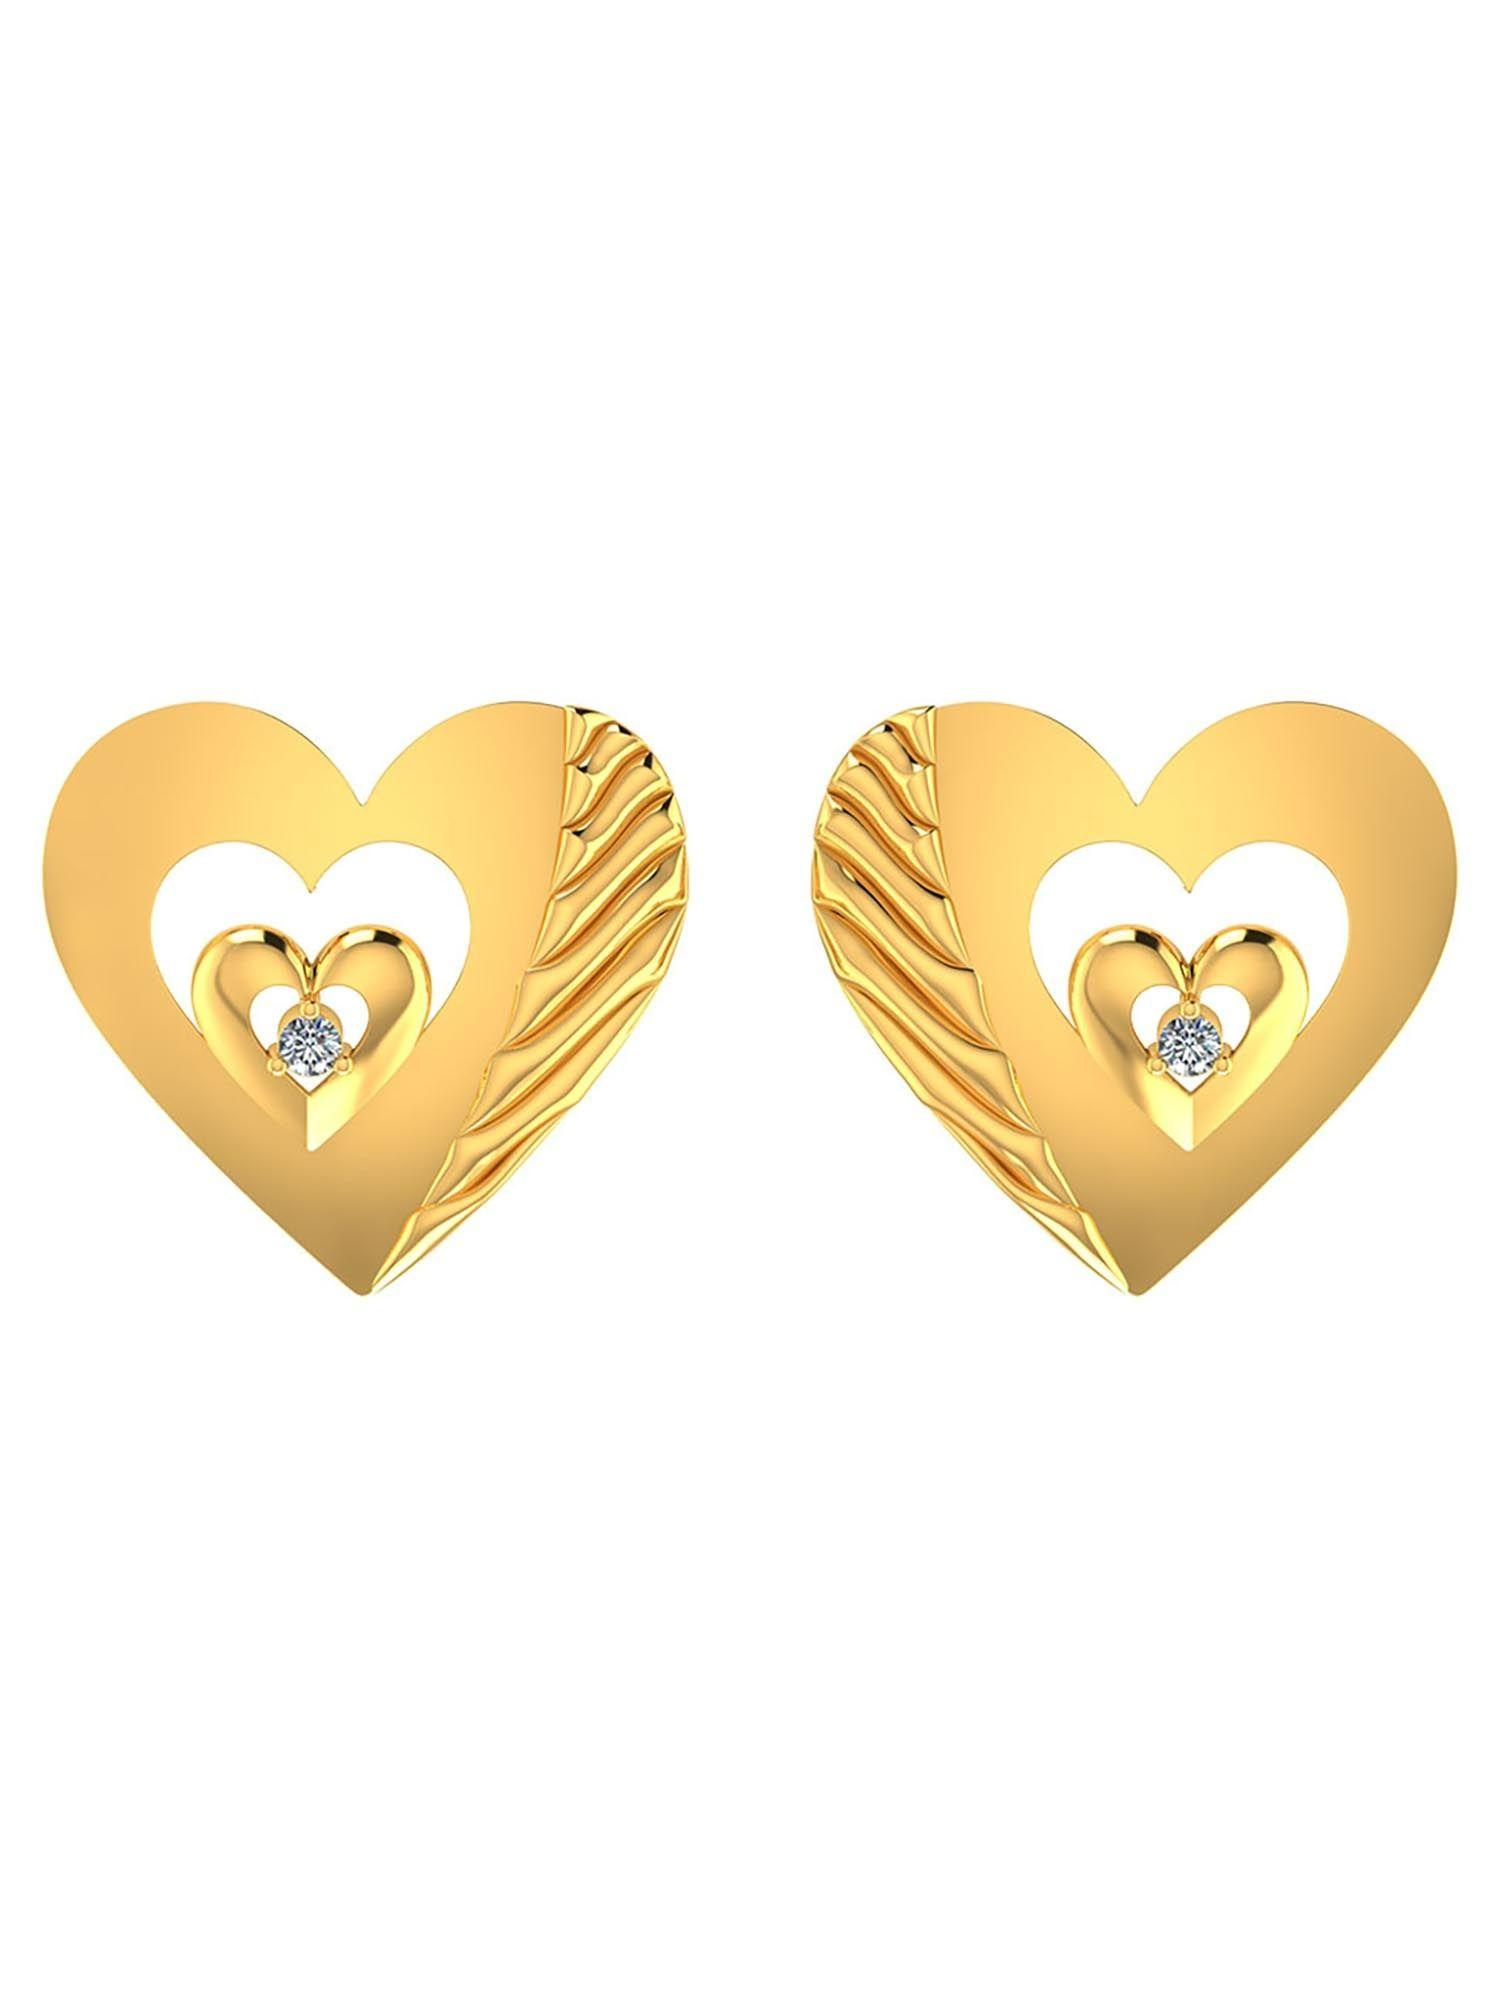 plaid heart stud earrings with gold screw